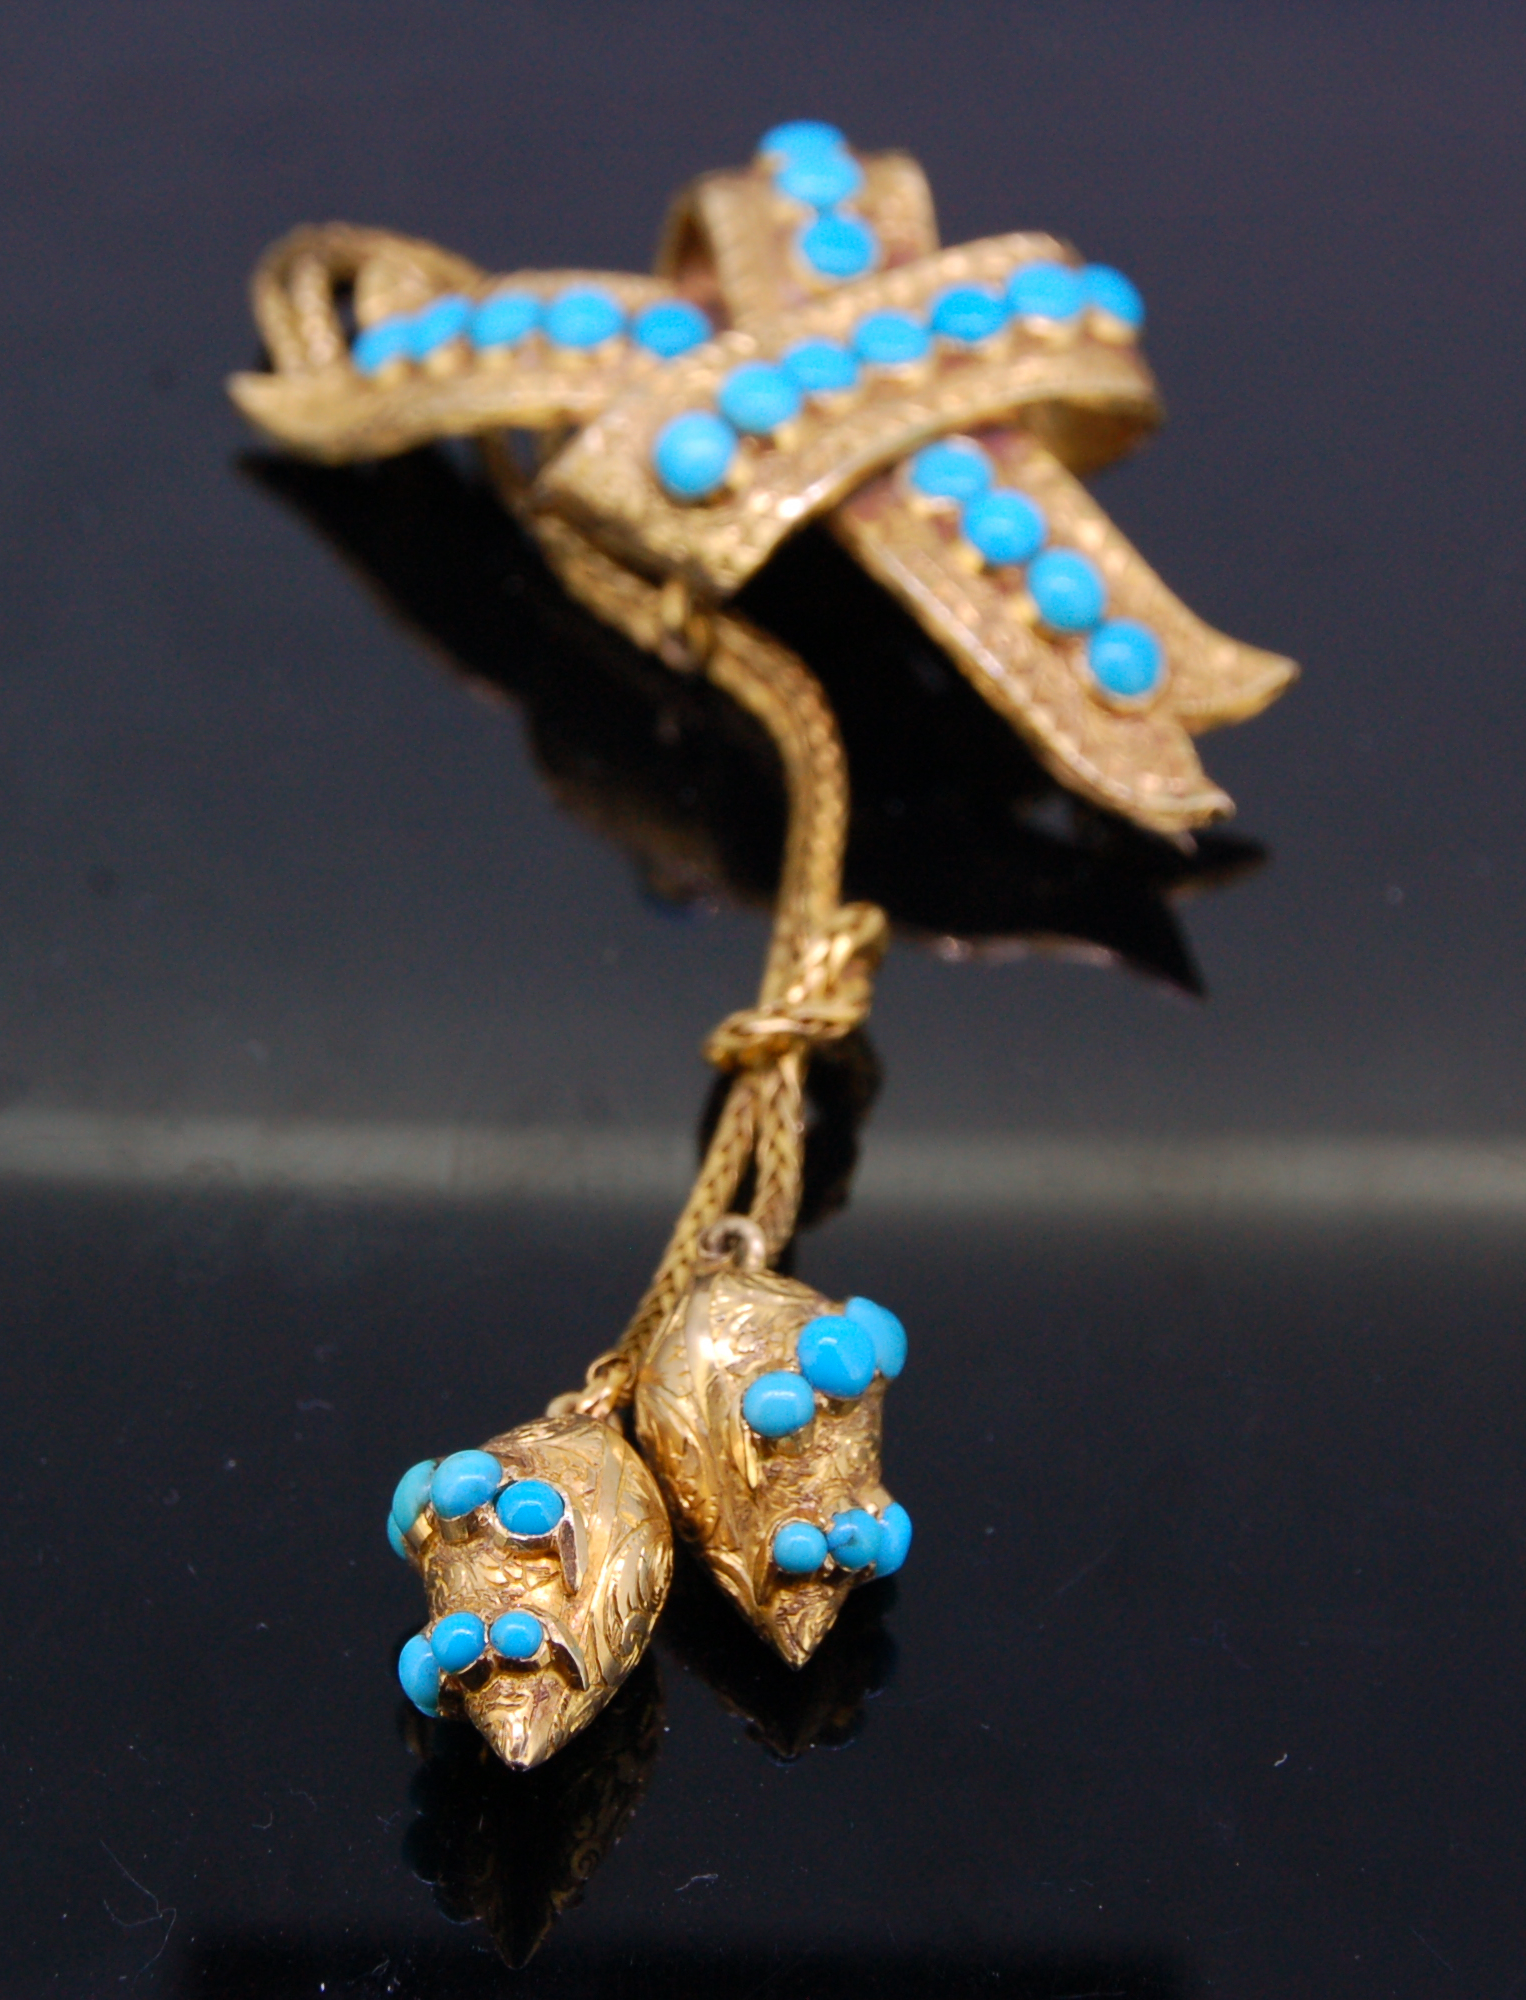 ANTIQUE TURQOISE DROP BROOCH - Image 2 of 2